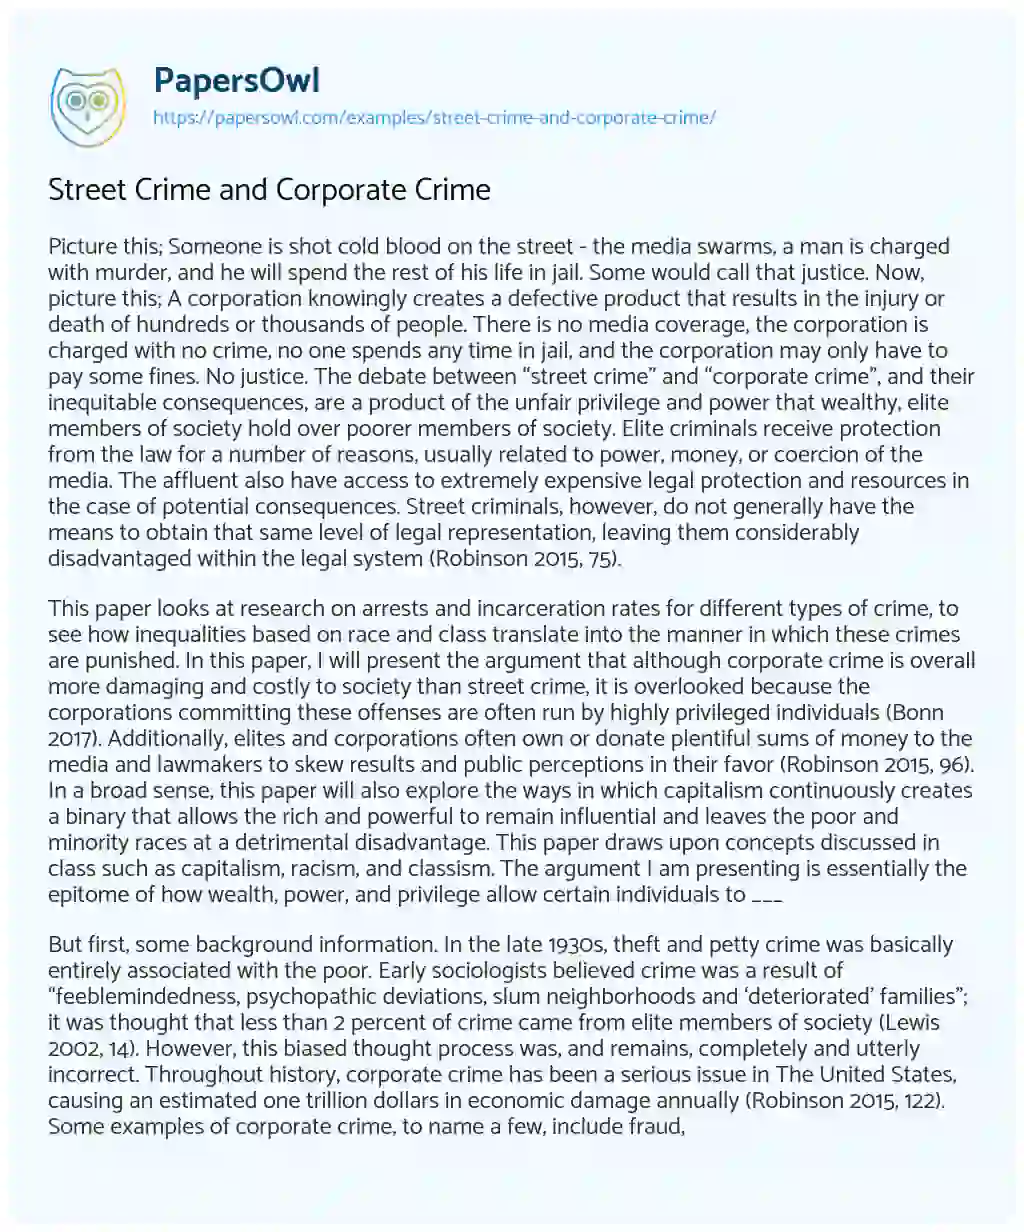 Essay on Street Crime and Corporate Crime